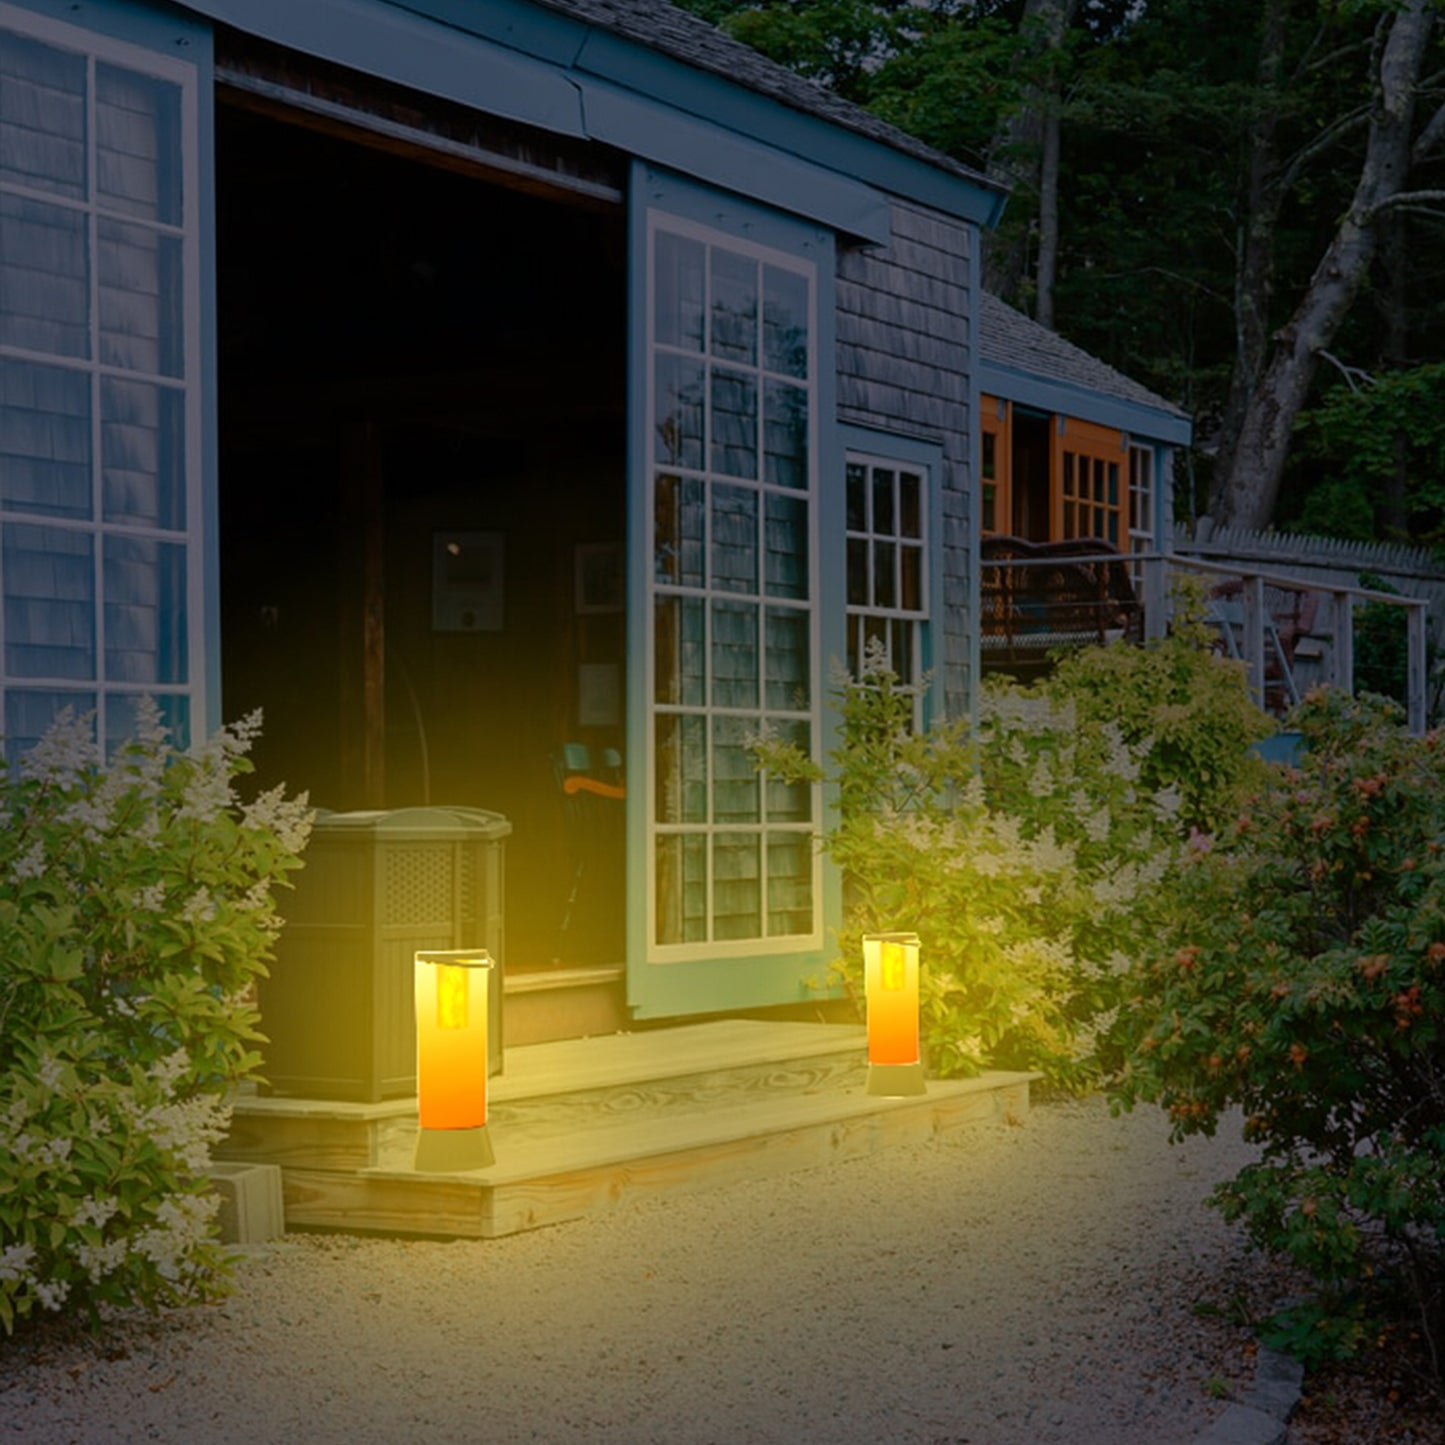 Solar Portable Cylinder Pathway Light (Flame Effect)